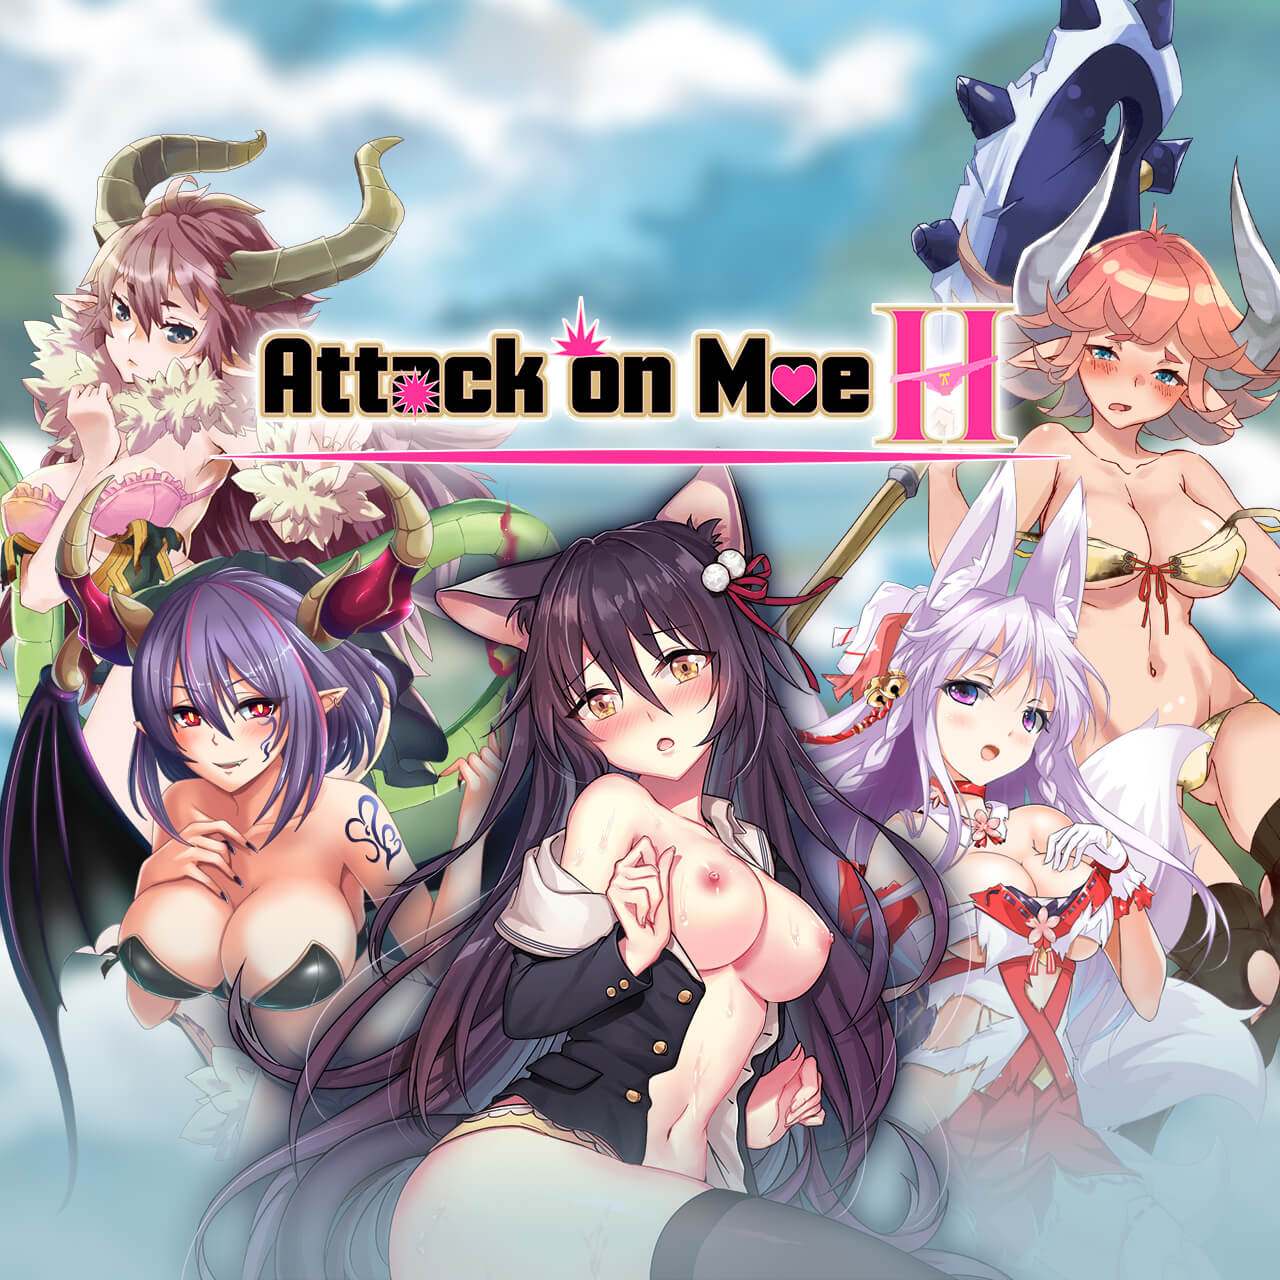 Hentai Sex Game Online - Attack On Moe H - Clicker Sex Game with APK file | Nutaku